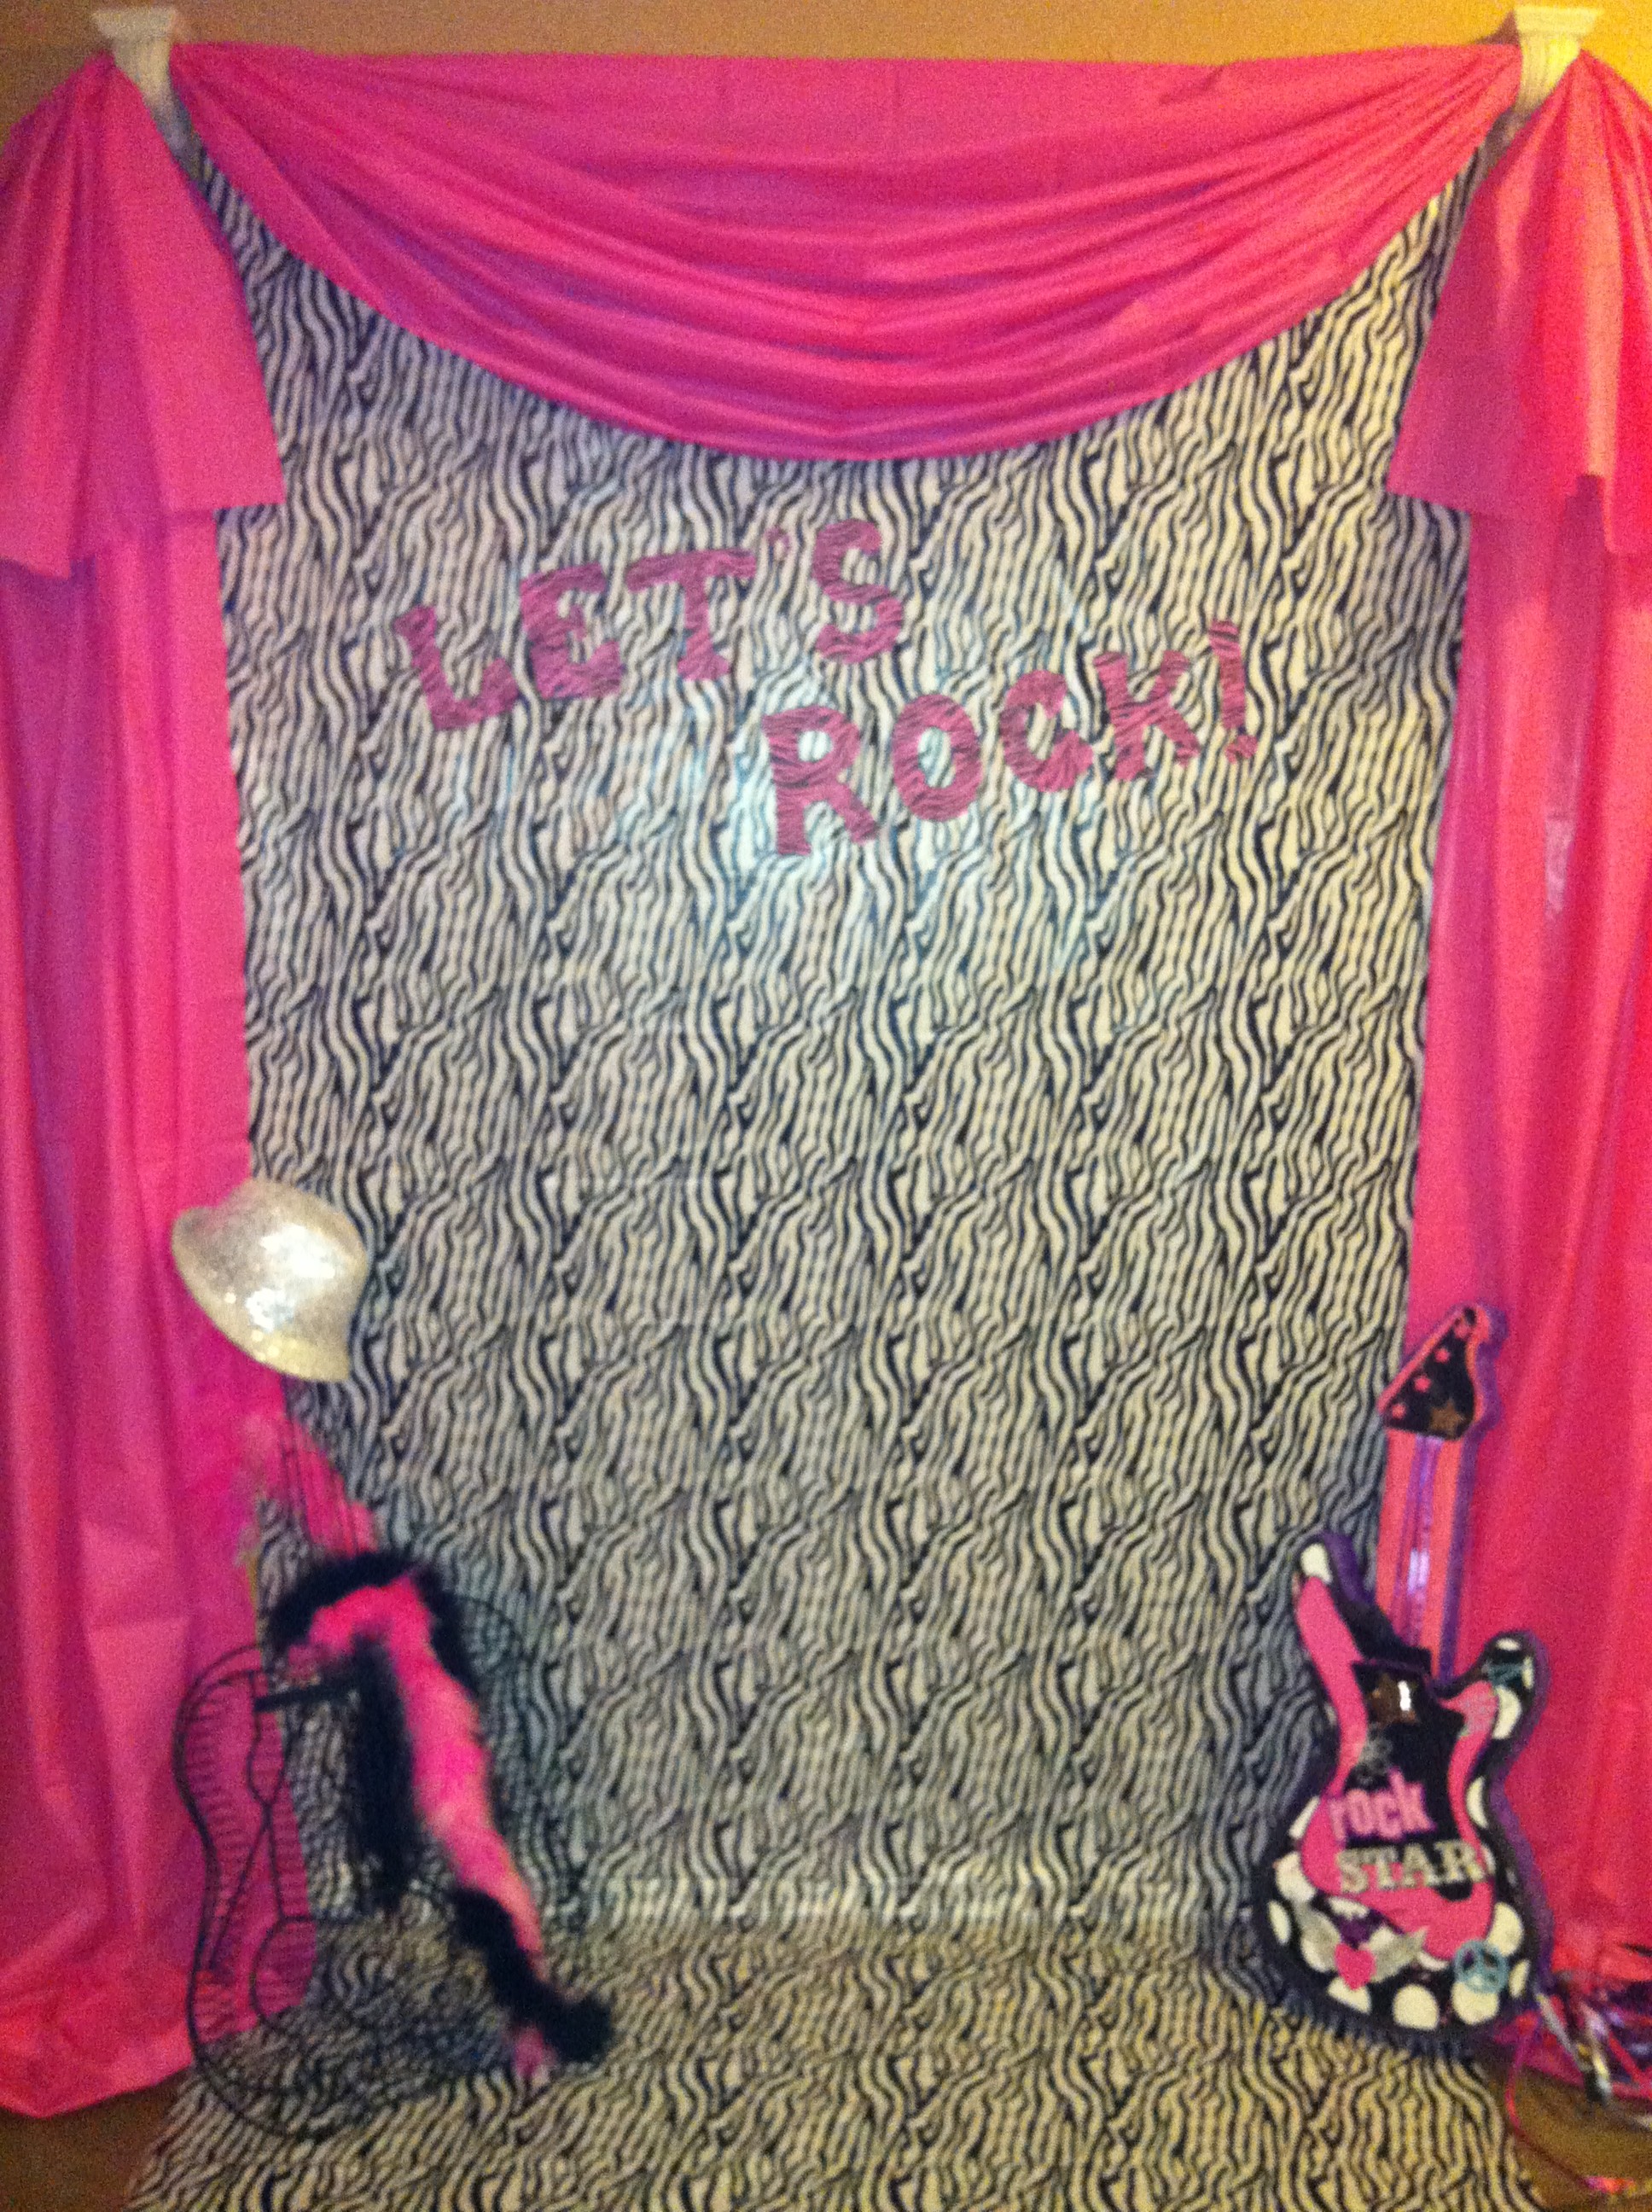 1936x2592 Backdrop idea for Stage/Performance area Rock Star Stage